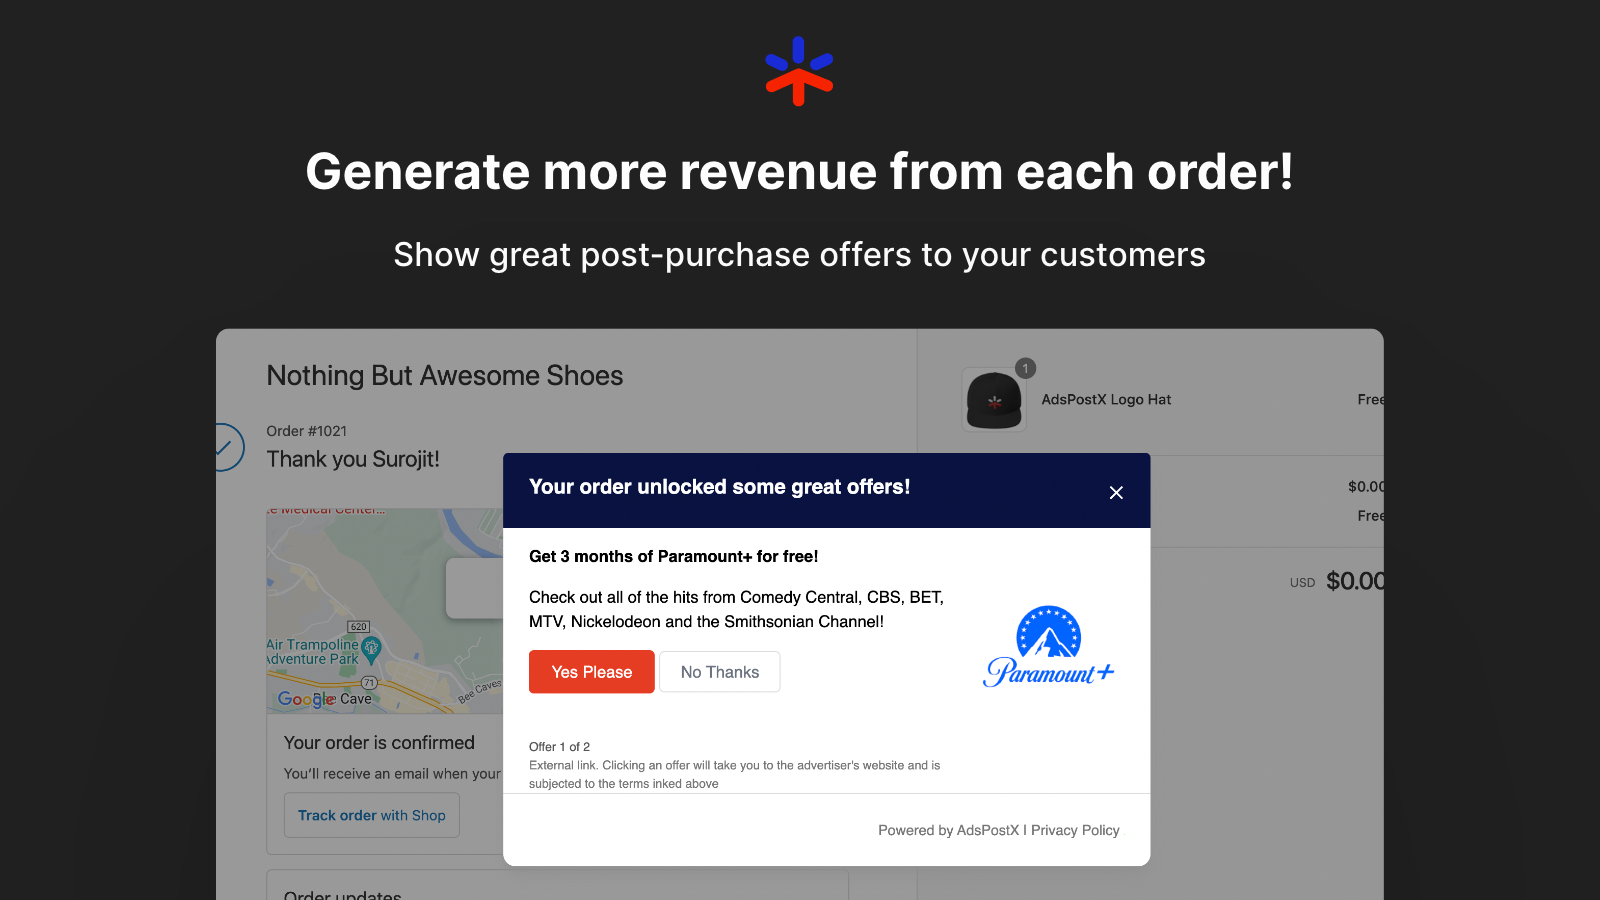 Generate more revenue from each order with post-purchase offers